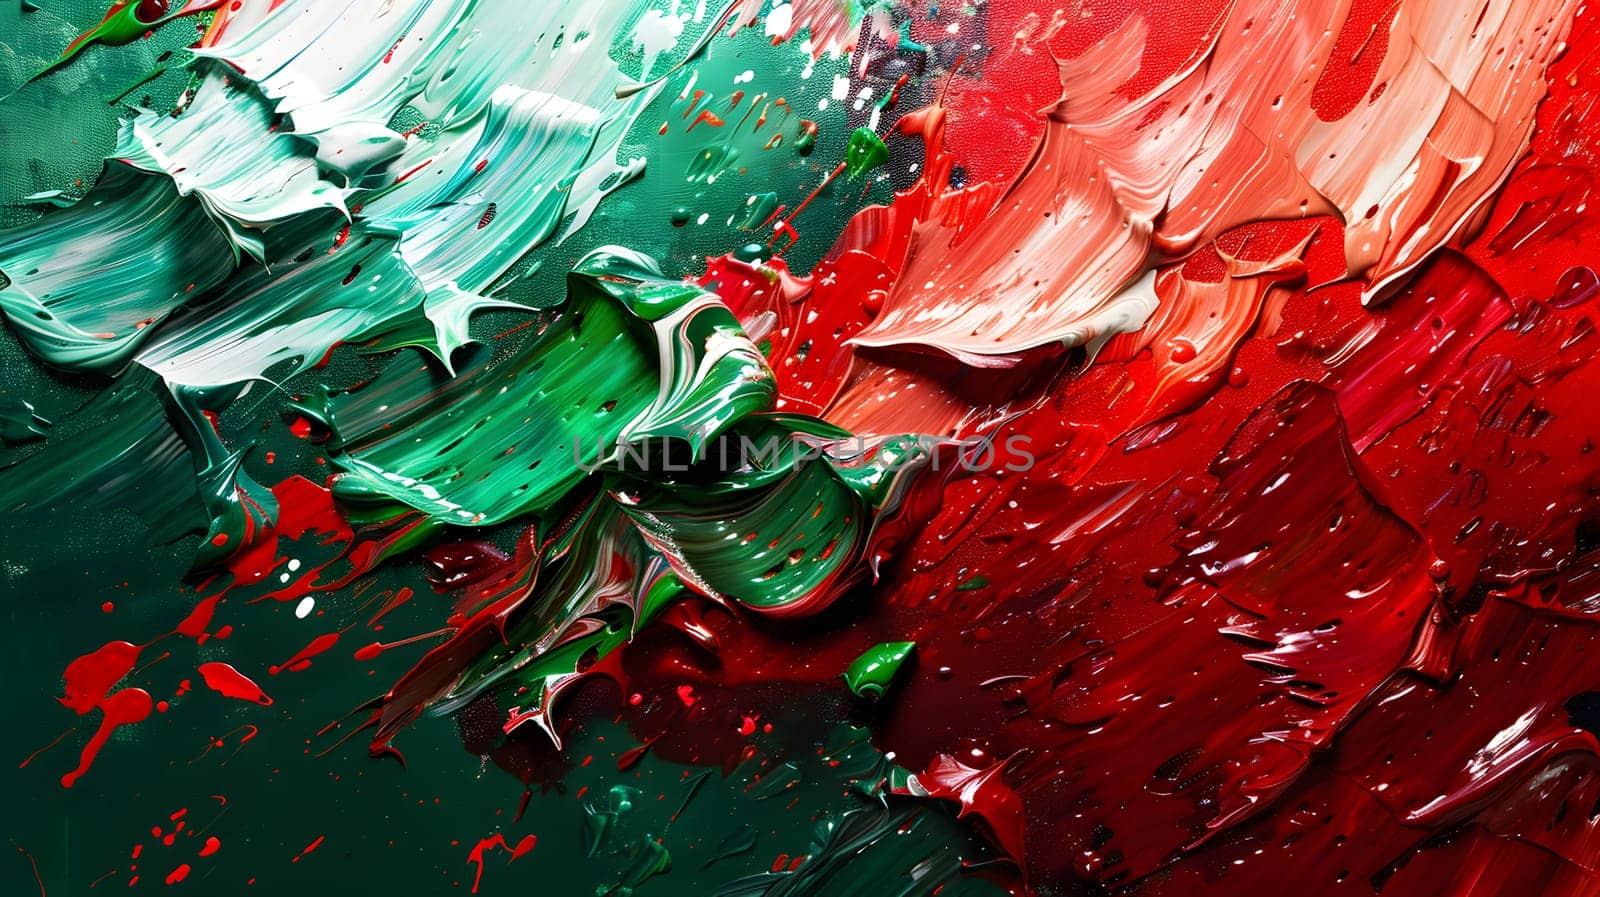 An intricate painting featuring a closeup of a red, green, and white pattern, created with fluid and liquid art paint on glass. A captivating art event